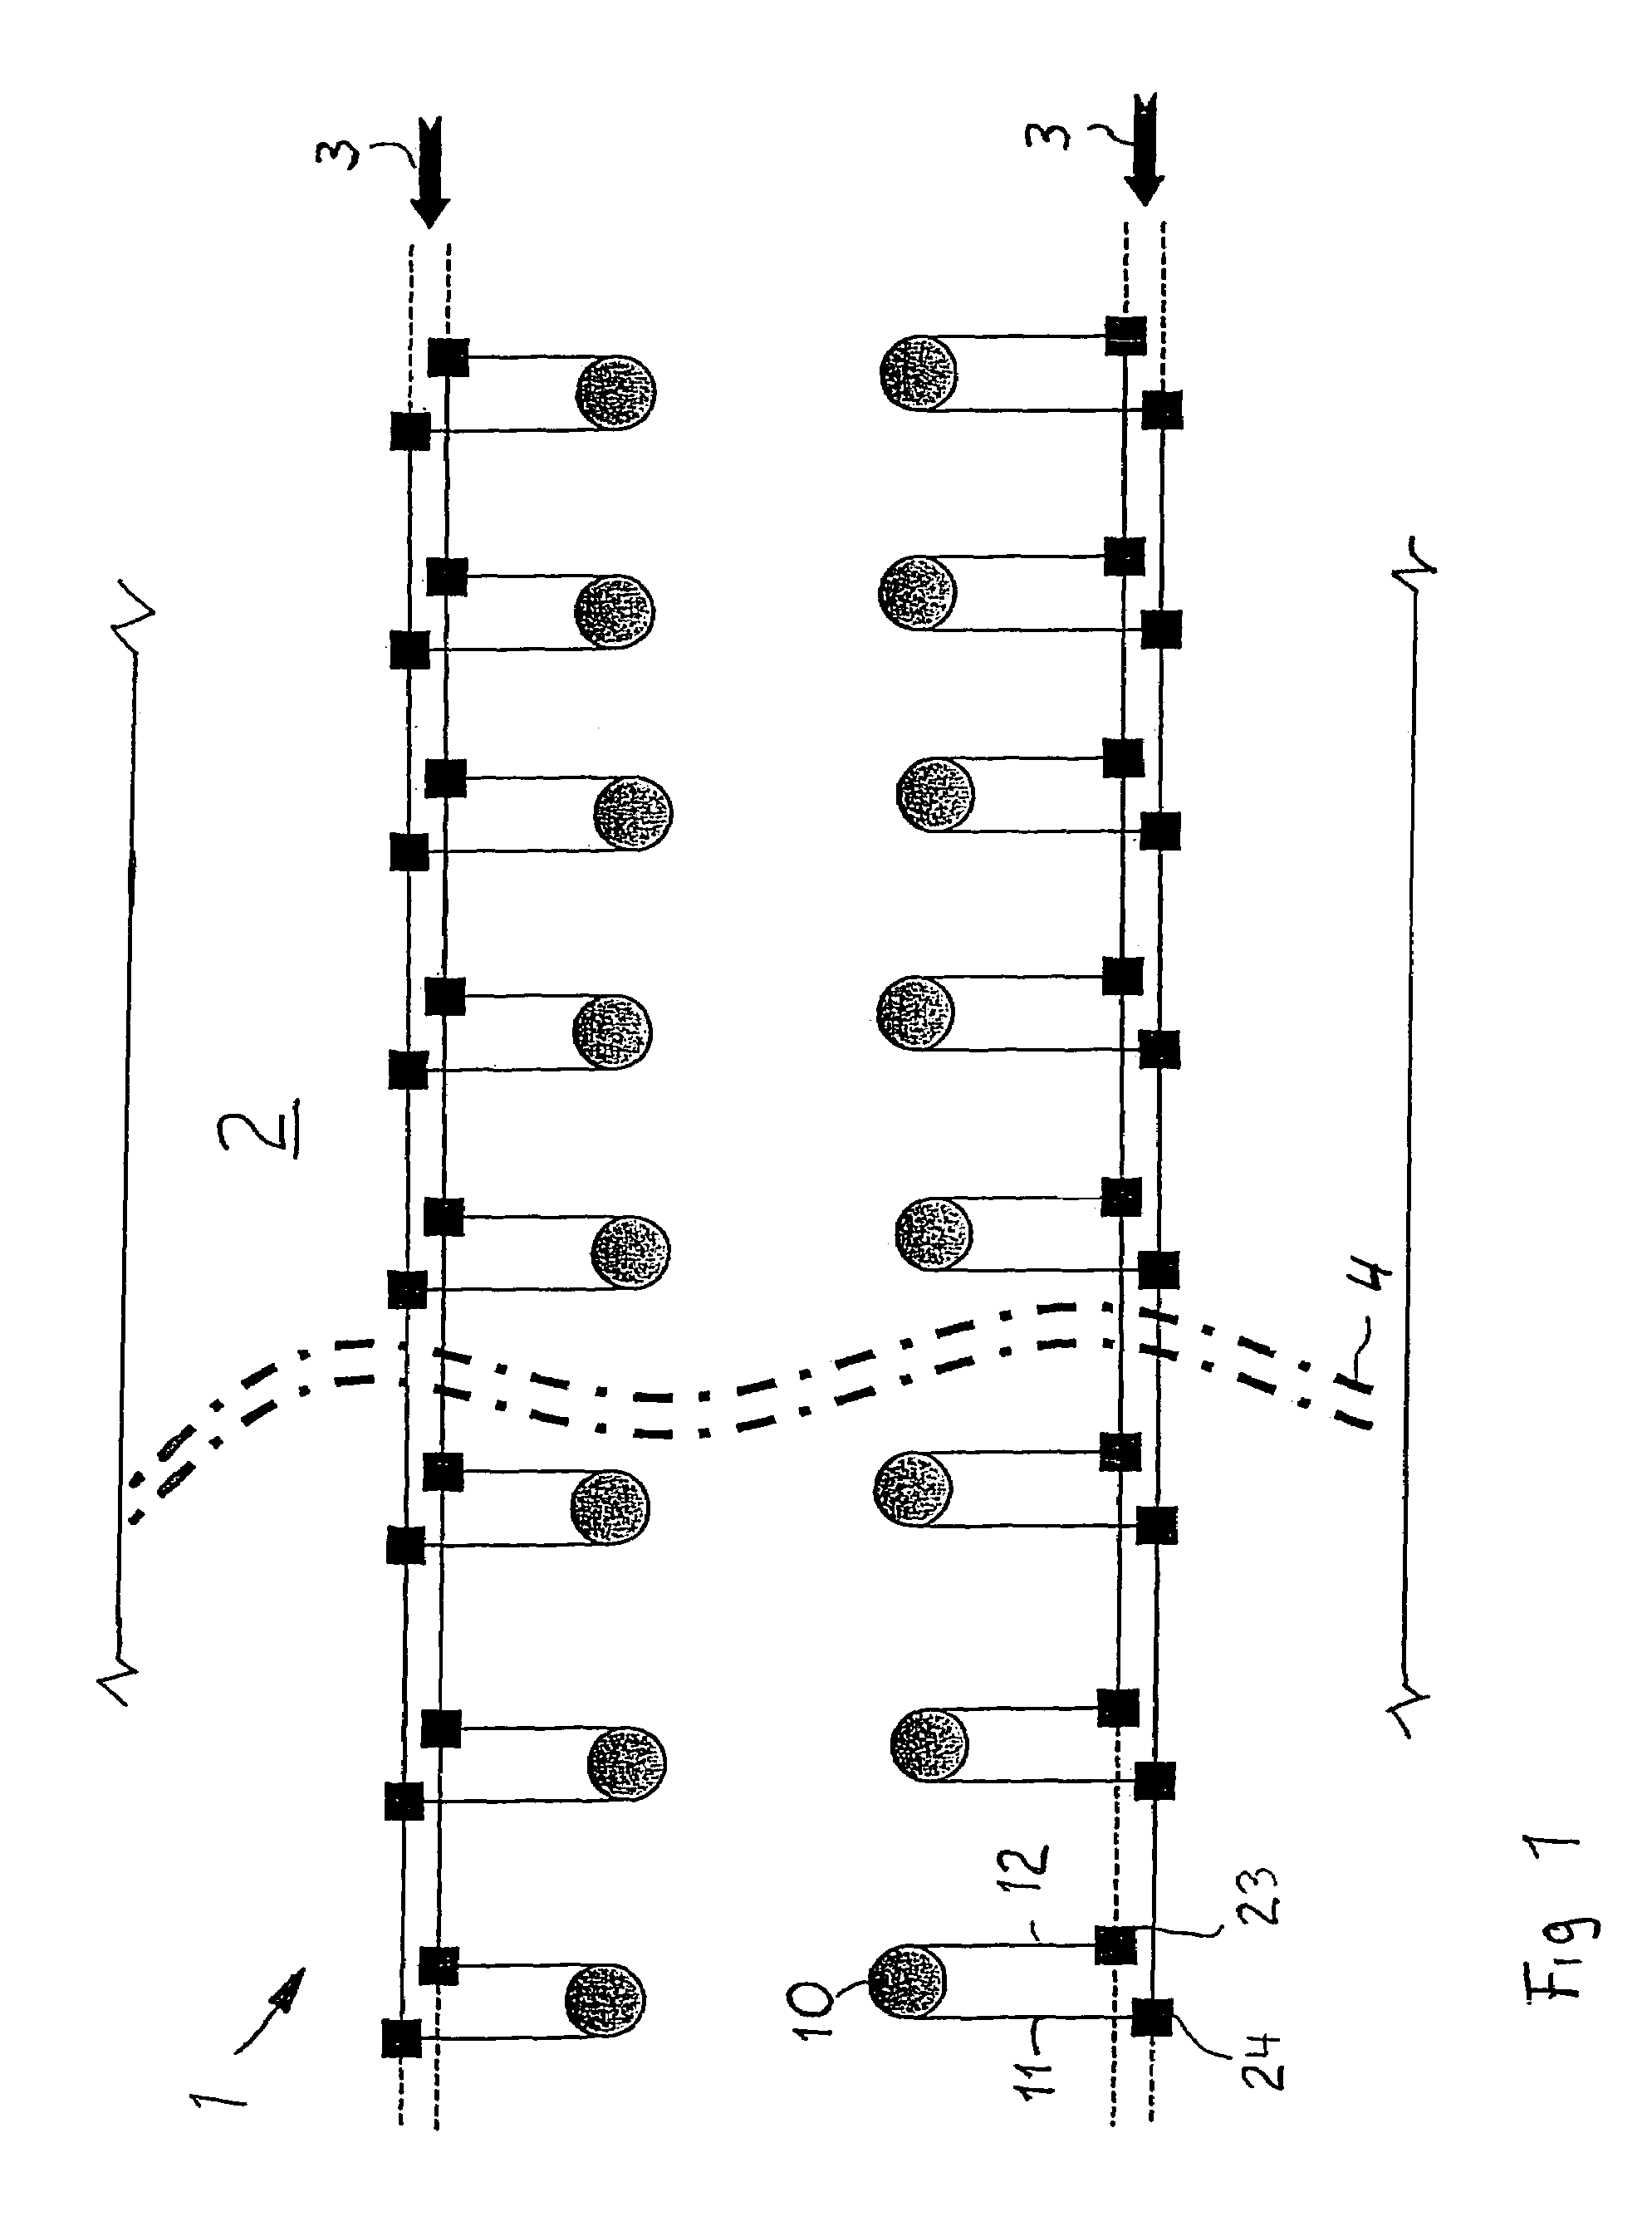 Emergency lighting arrangement with decentralized emergency power supply for an aircraft